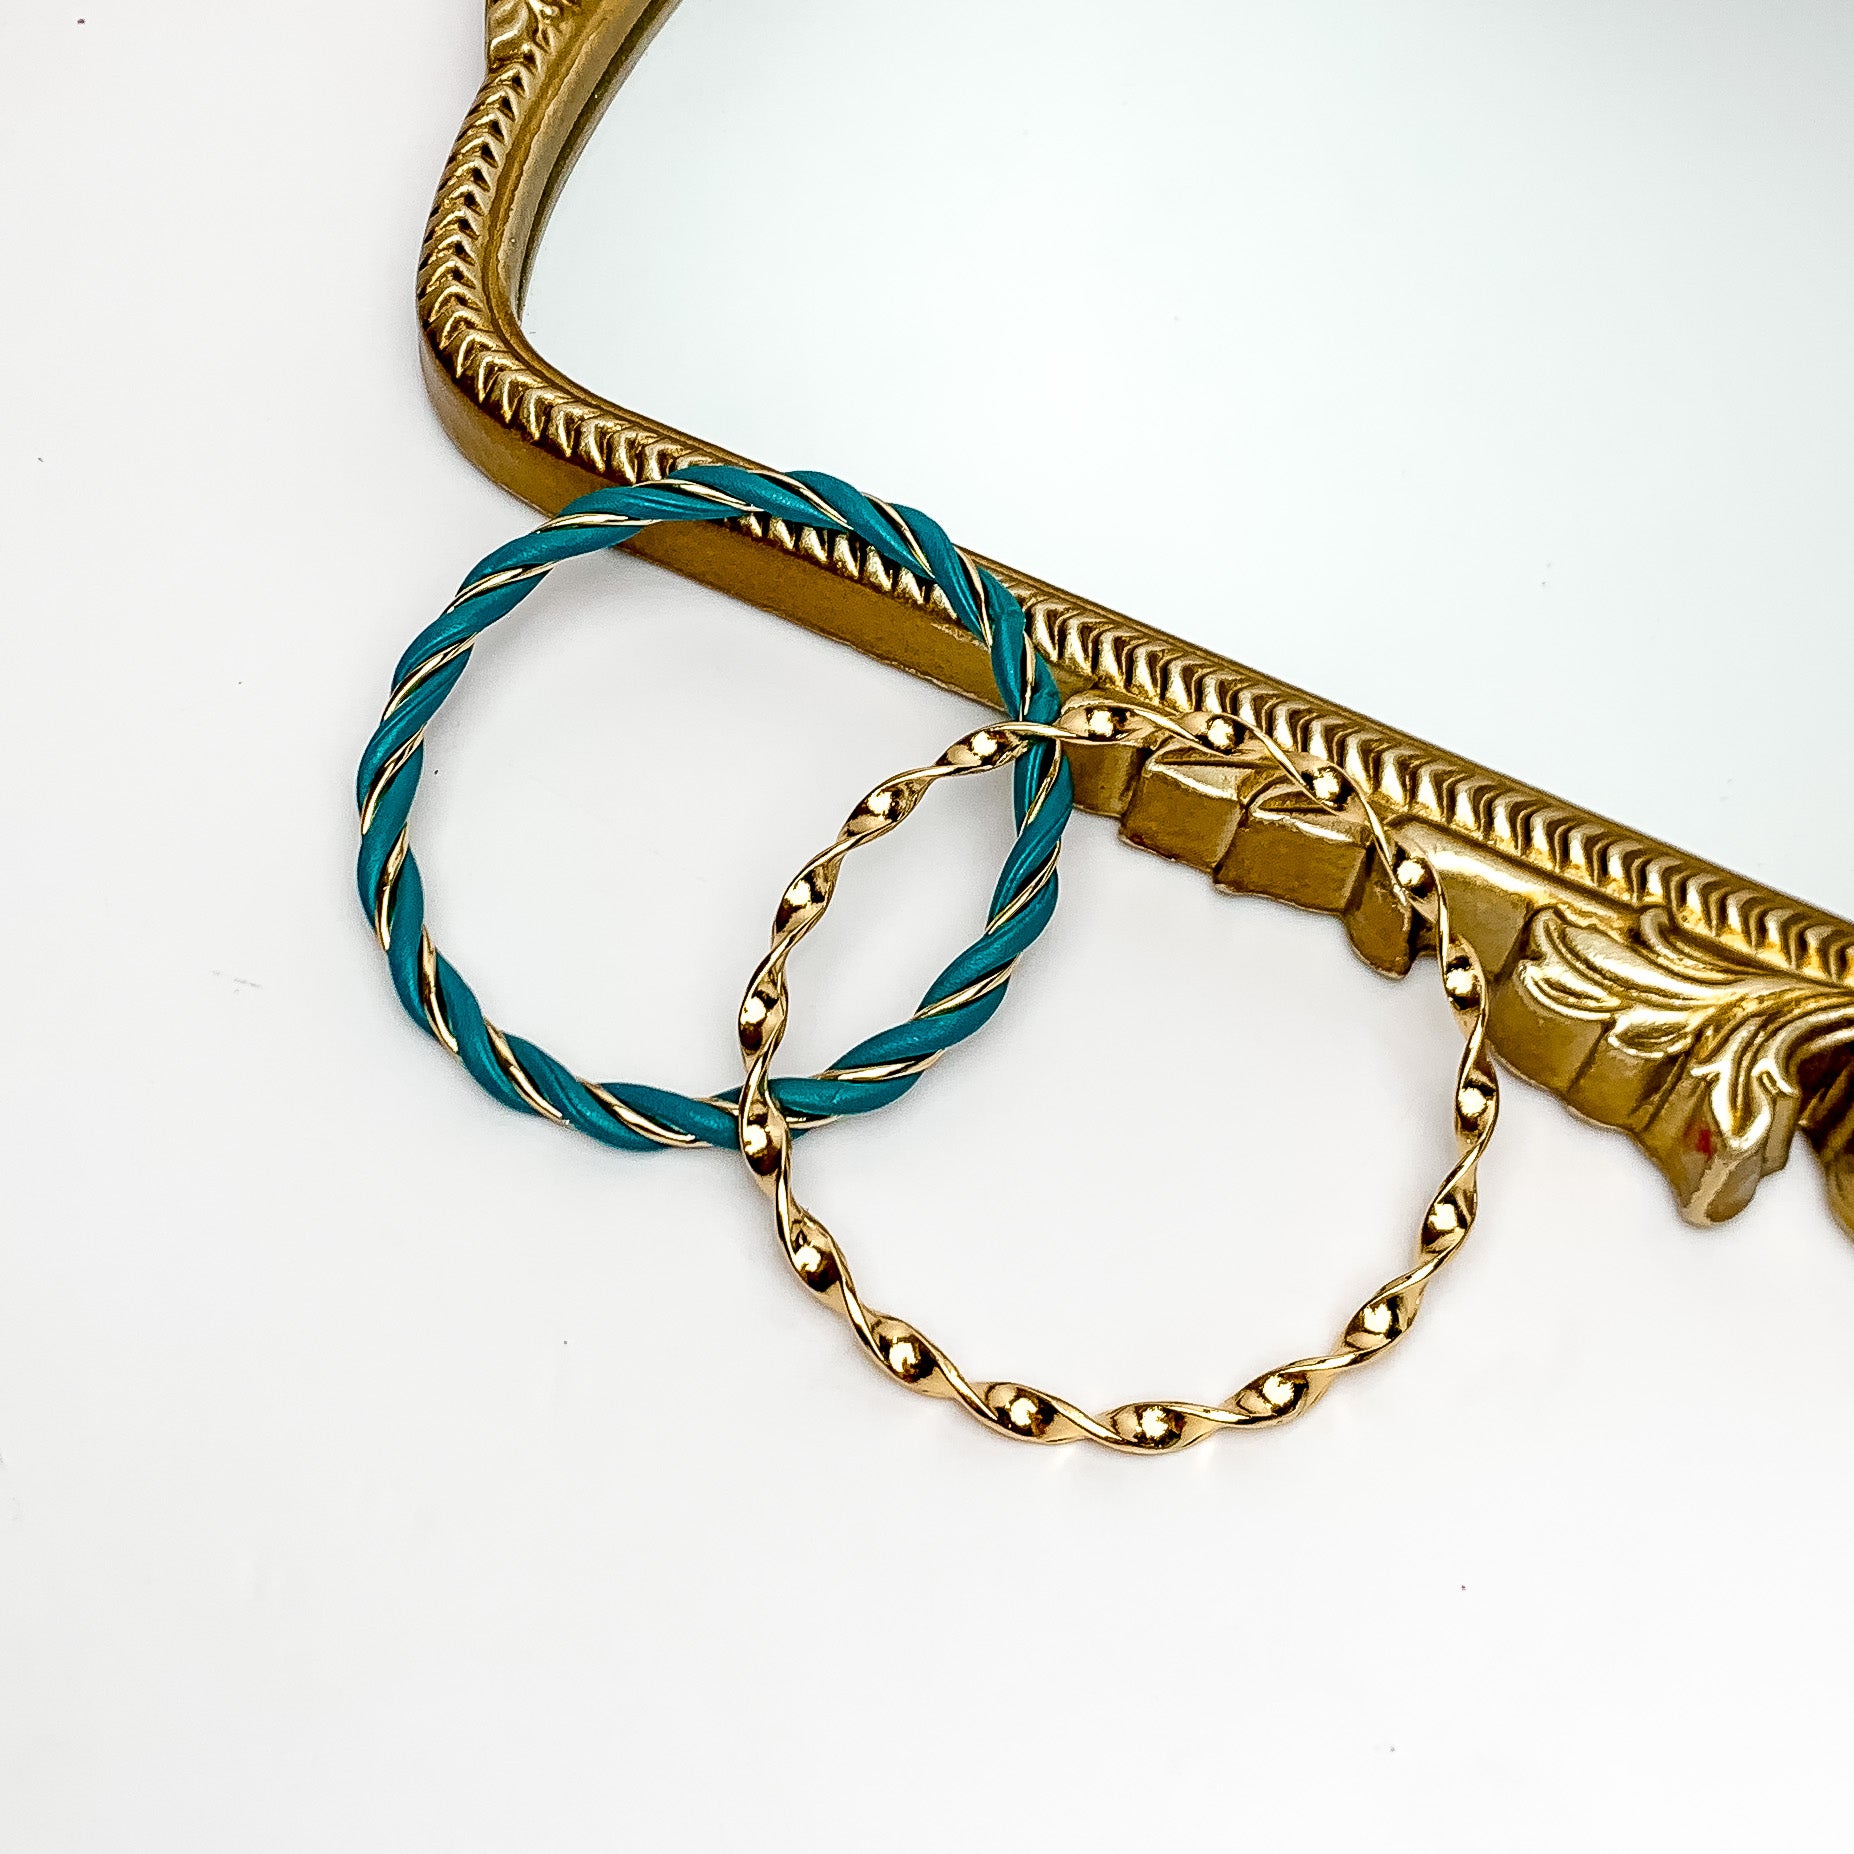 Set of Two | Coastal Babe Gold Tone Bangle Set with Faux Leather Wrap in Teal Green - Giddy Up Glamour Boutique